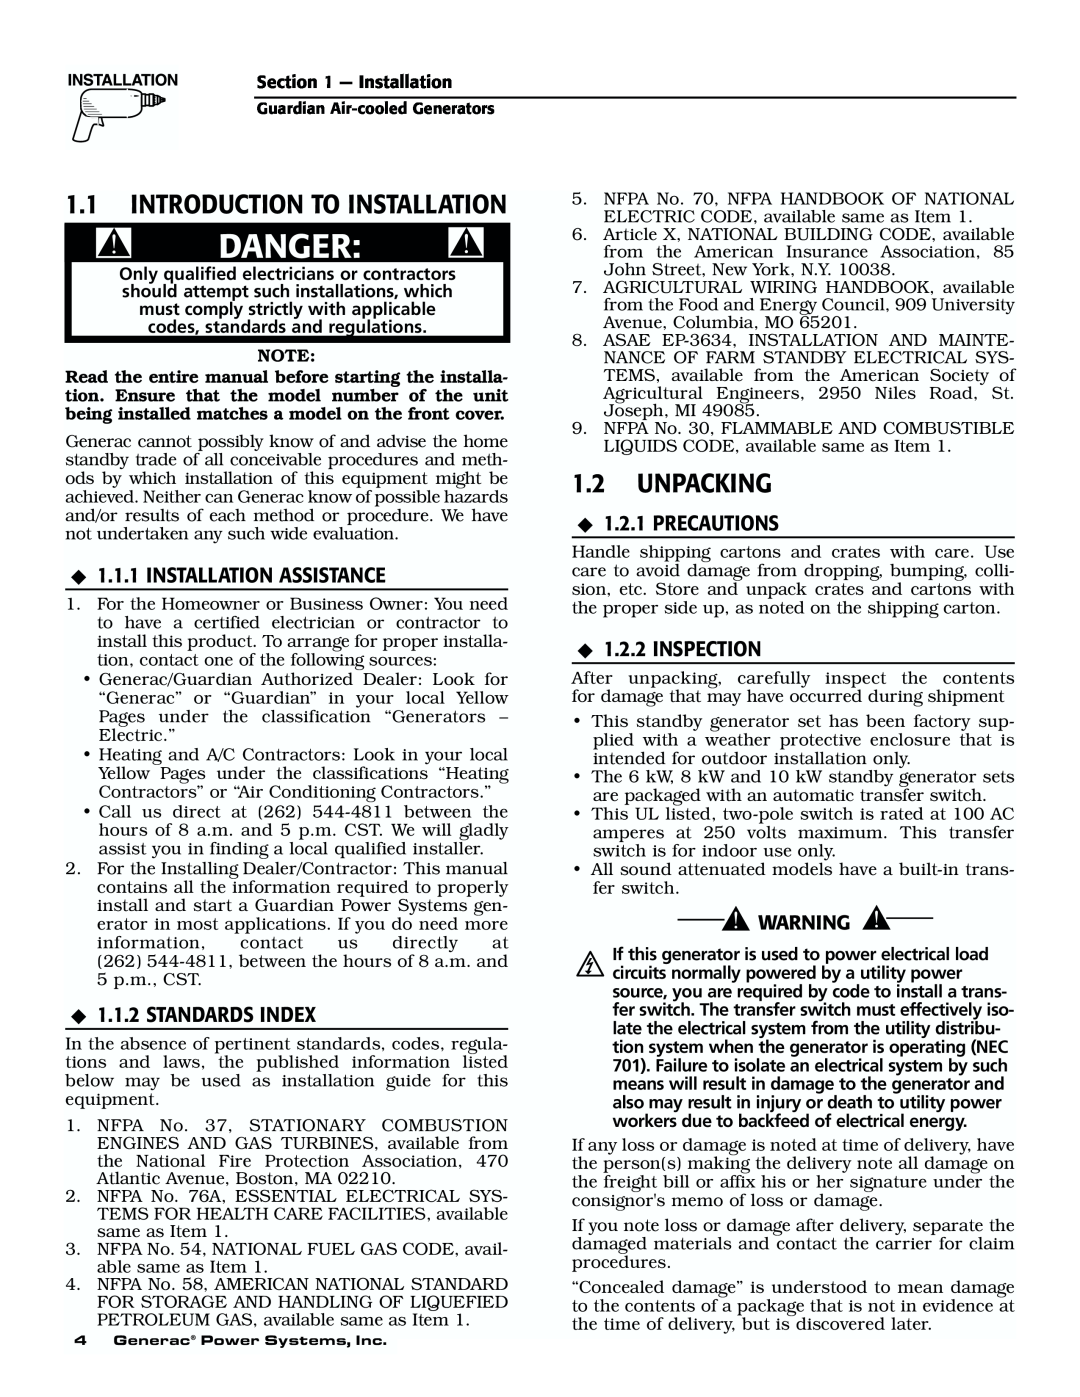 Generac 04077-01, 04109-1, 04079-1, 00789-1, 00844-1 manual 1.1INTRODUCTION TO INSTALLATION, 1.2UNPACKING, Standards Index 